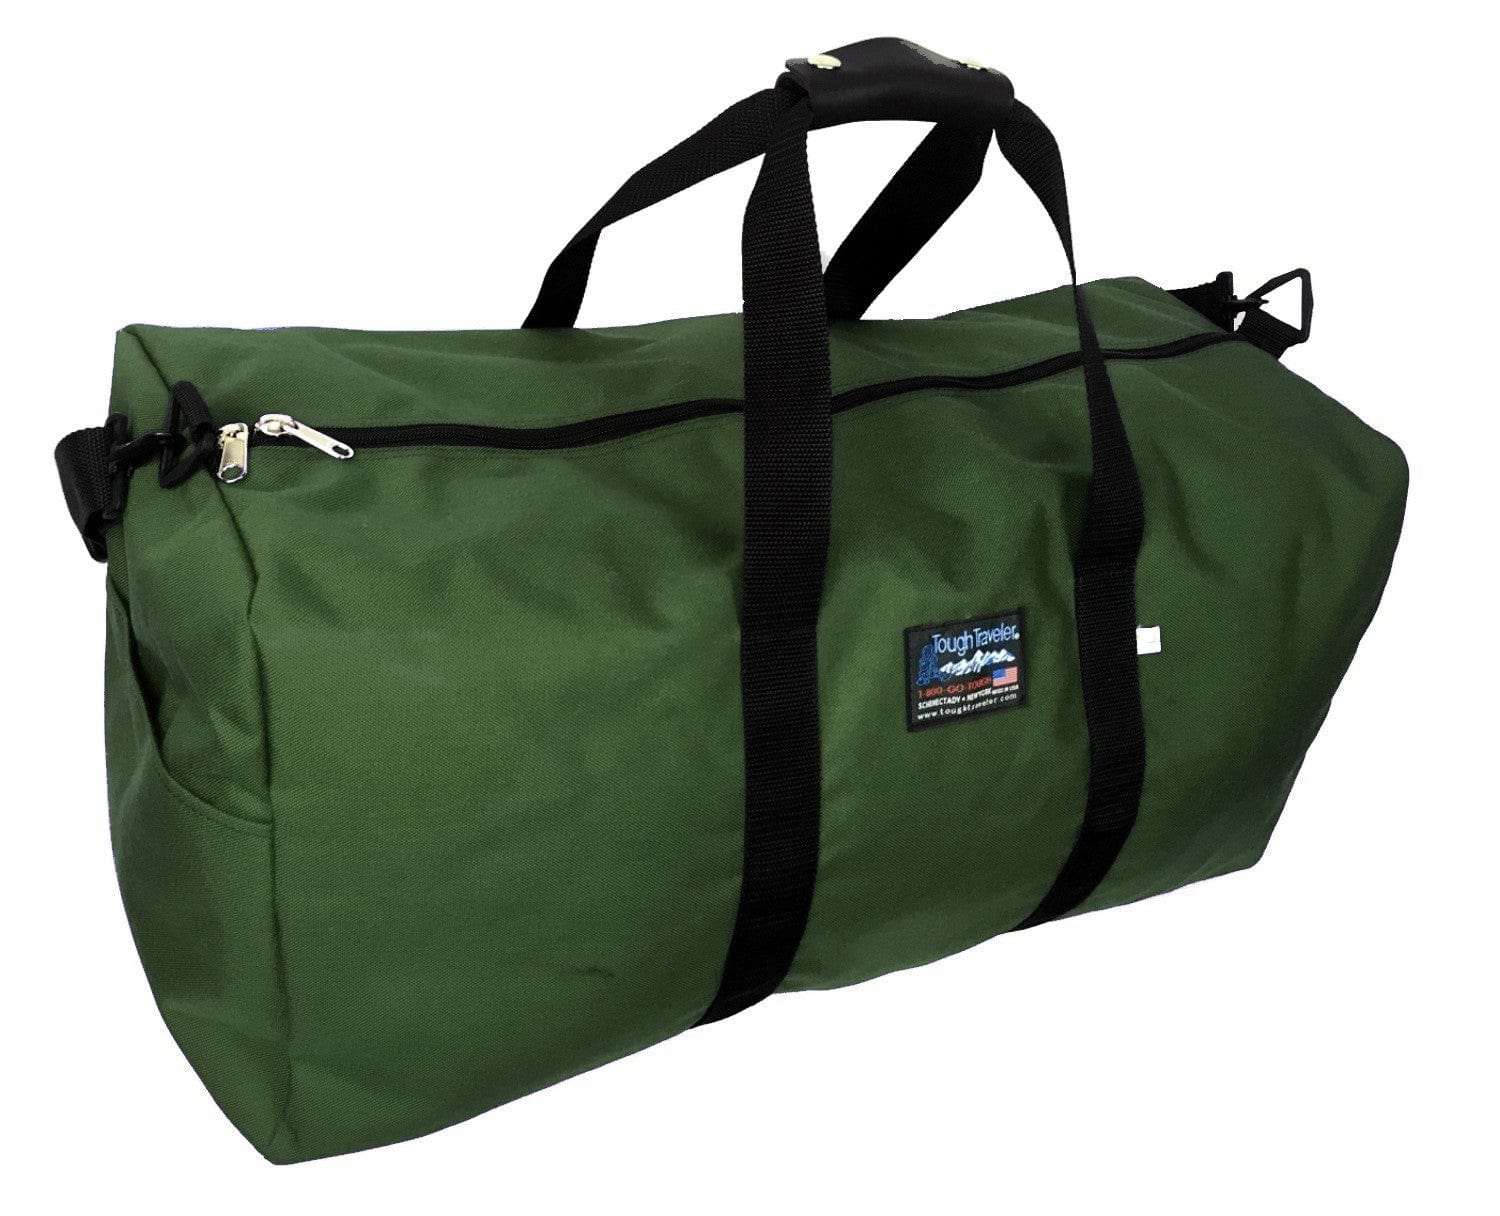 2 Pc Lightweight Duffel Bag Carrying Tote Barrel Traveling Luggage